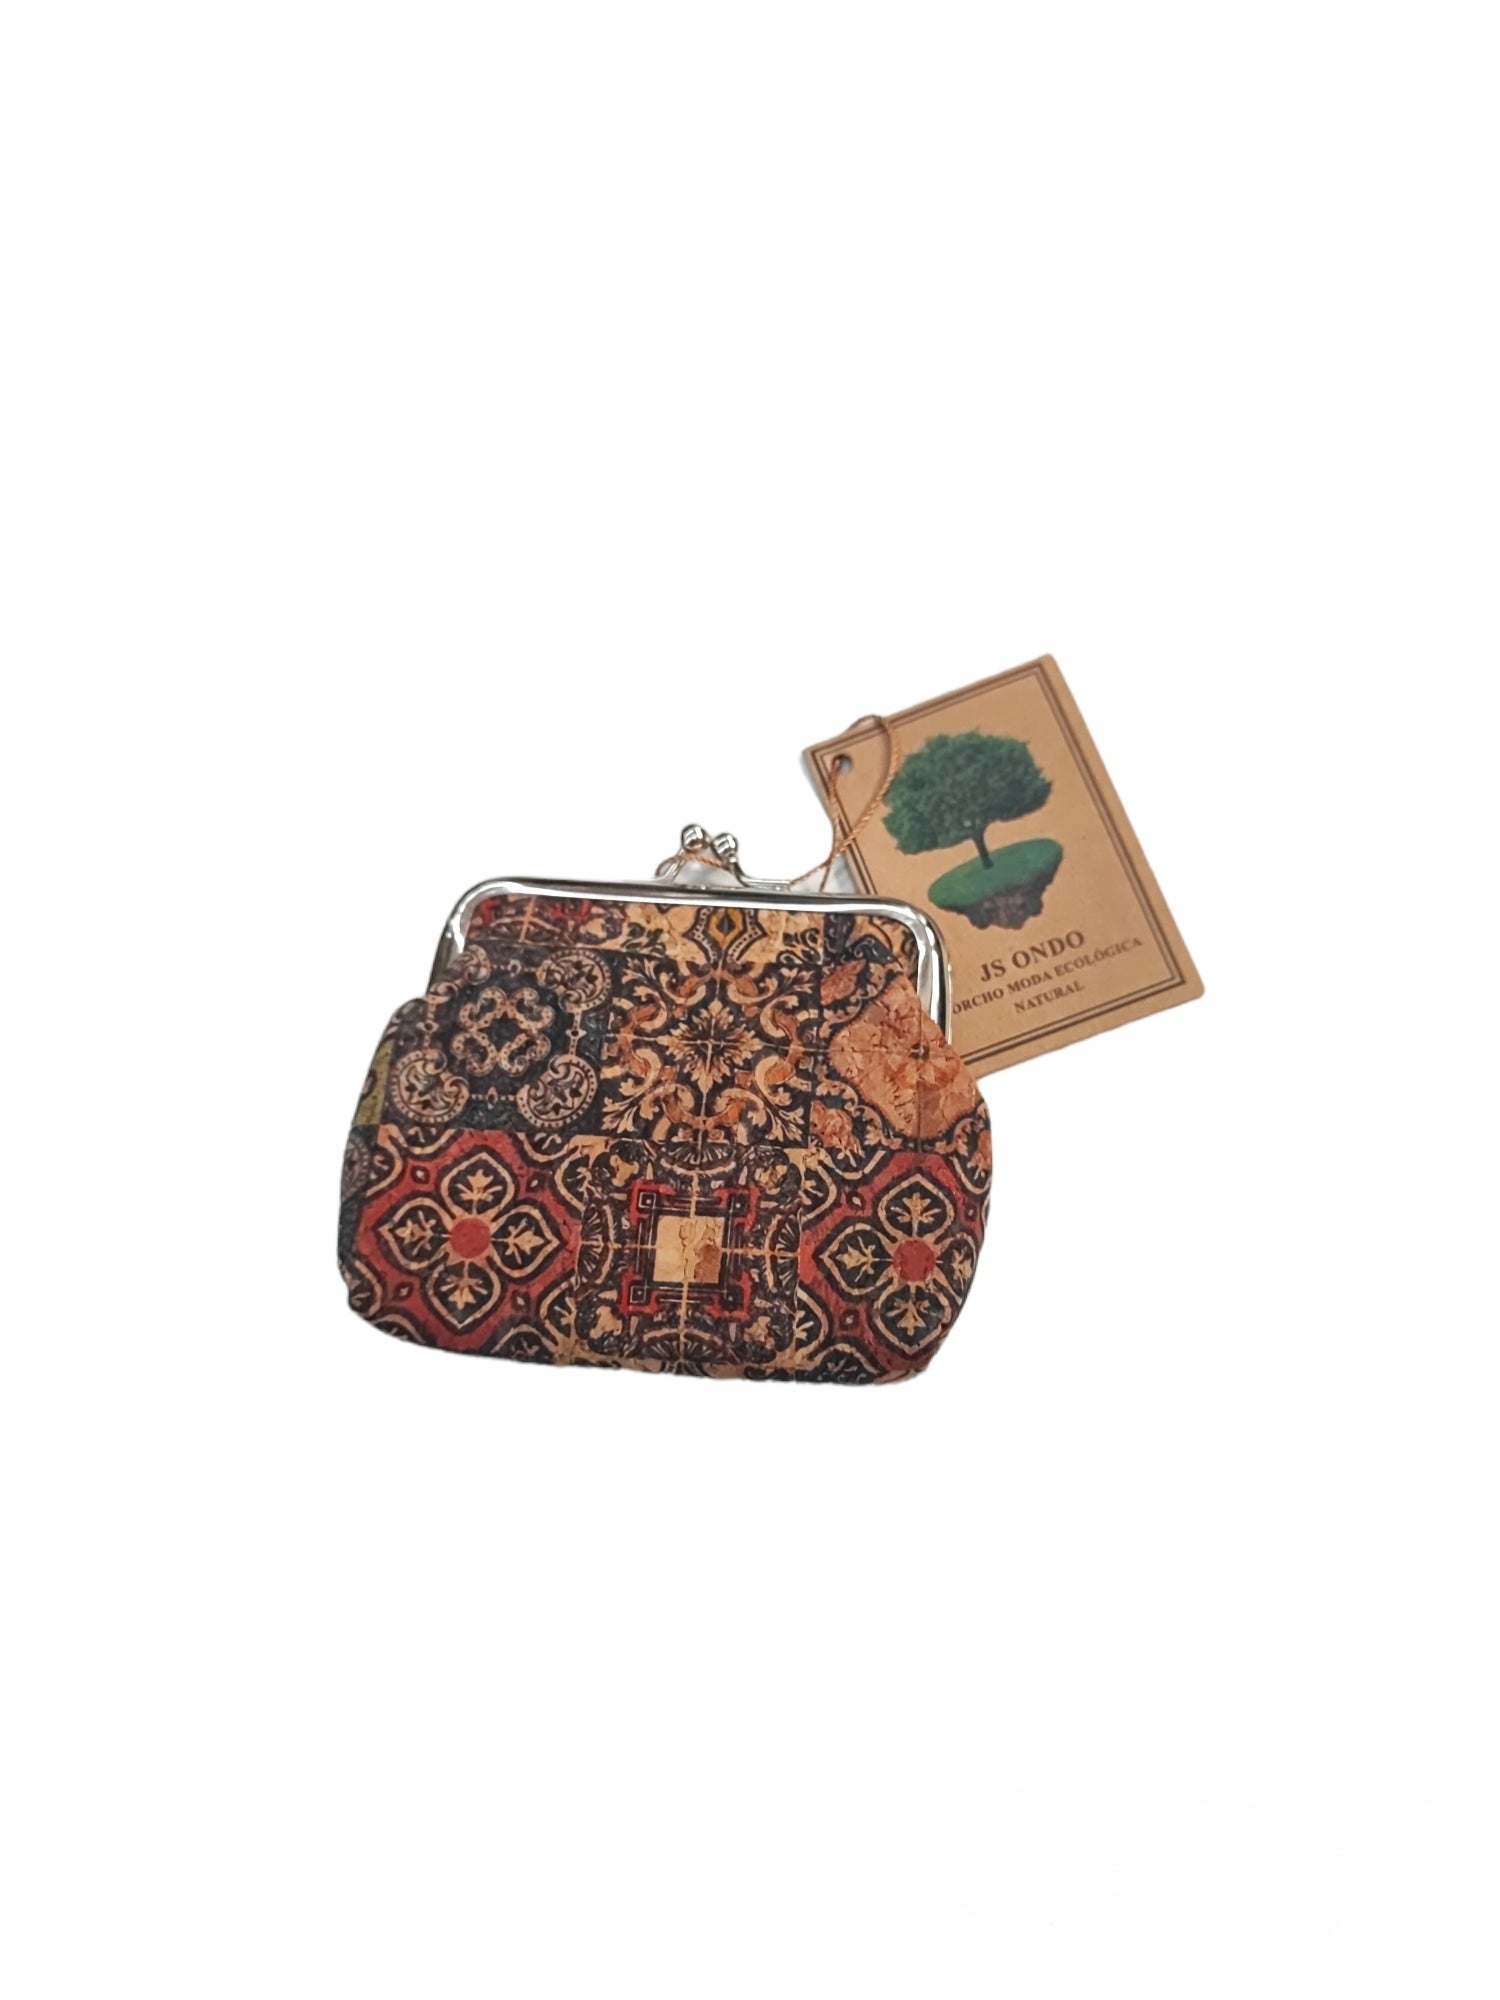 Purse with click-clac clasp Ecological organic cork (x12)